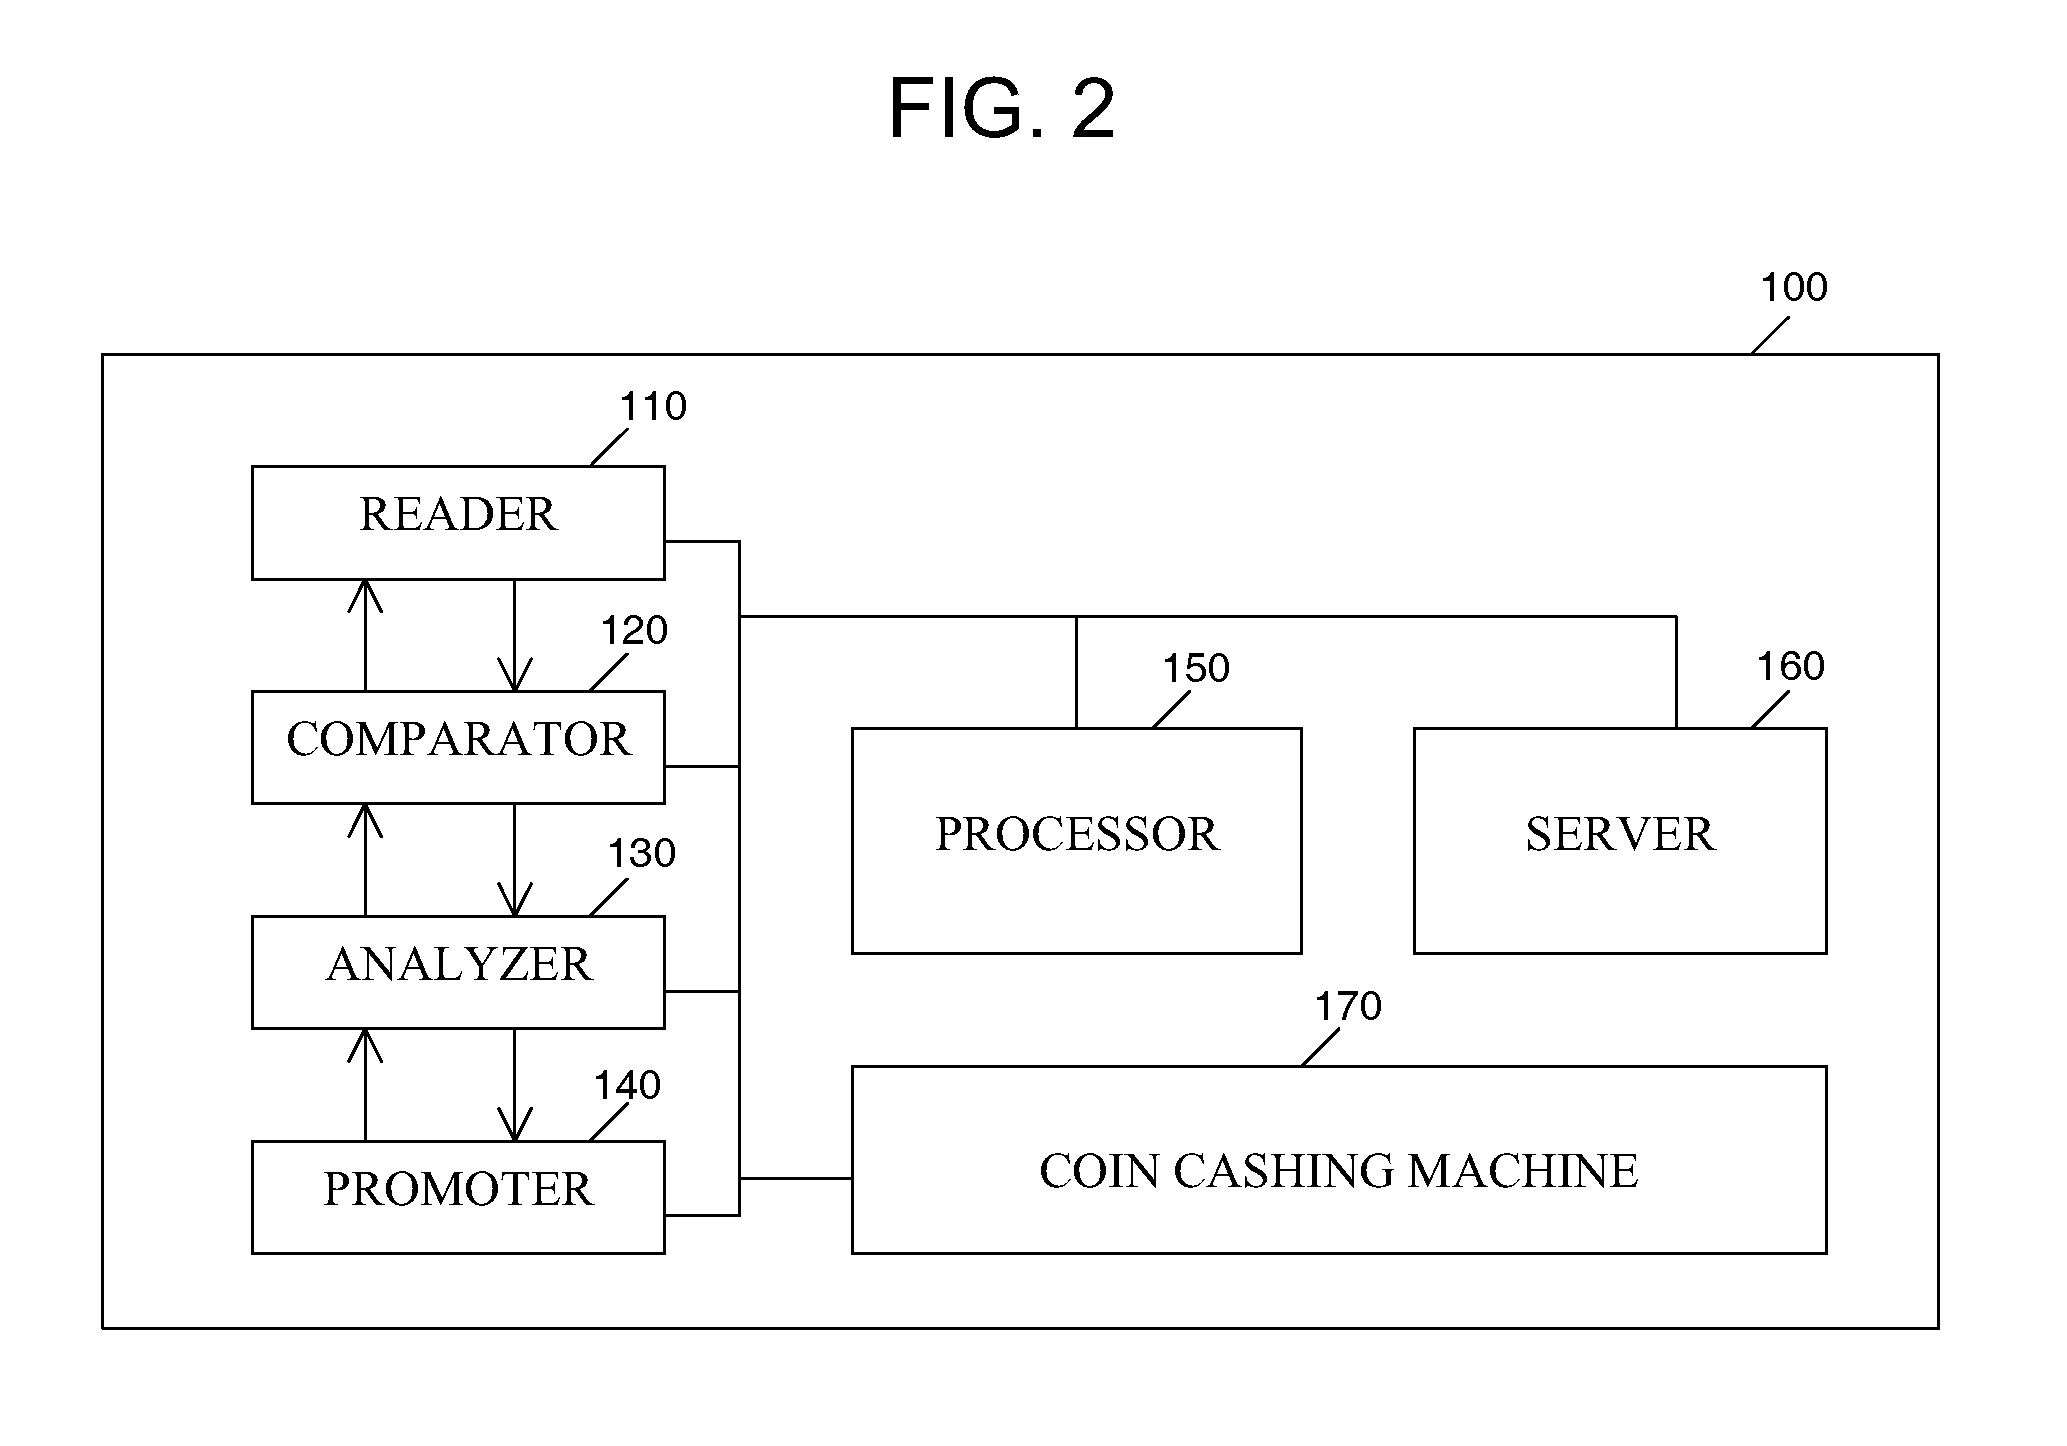 Coin-free retail management system and method